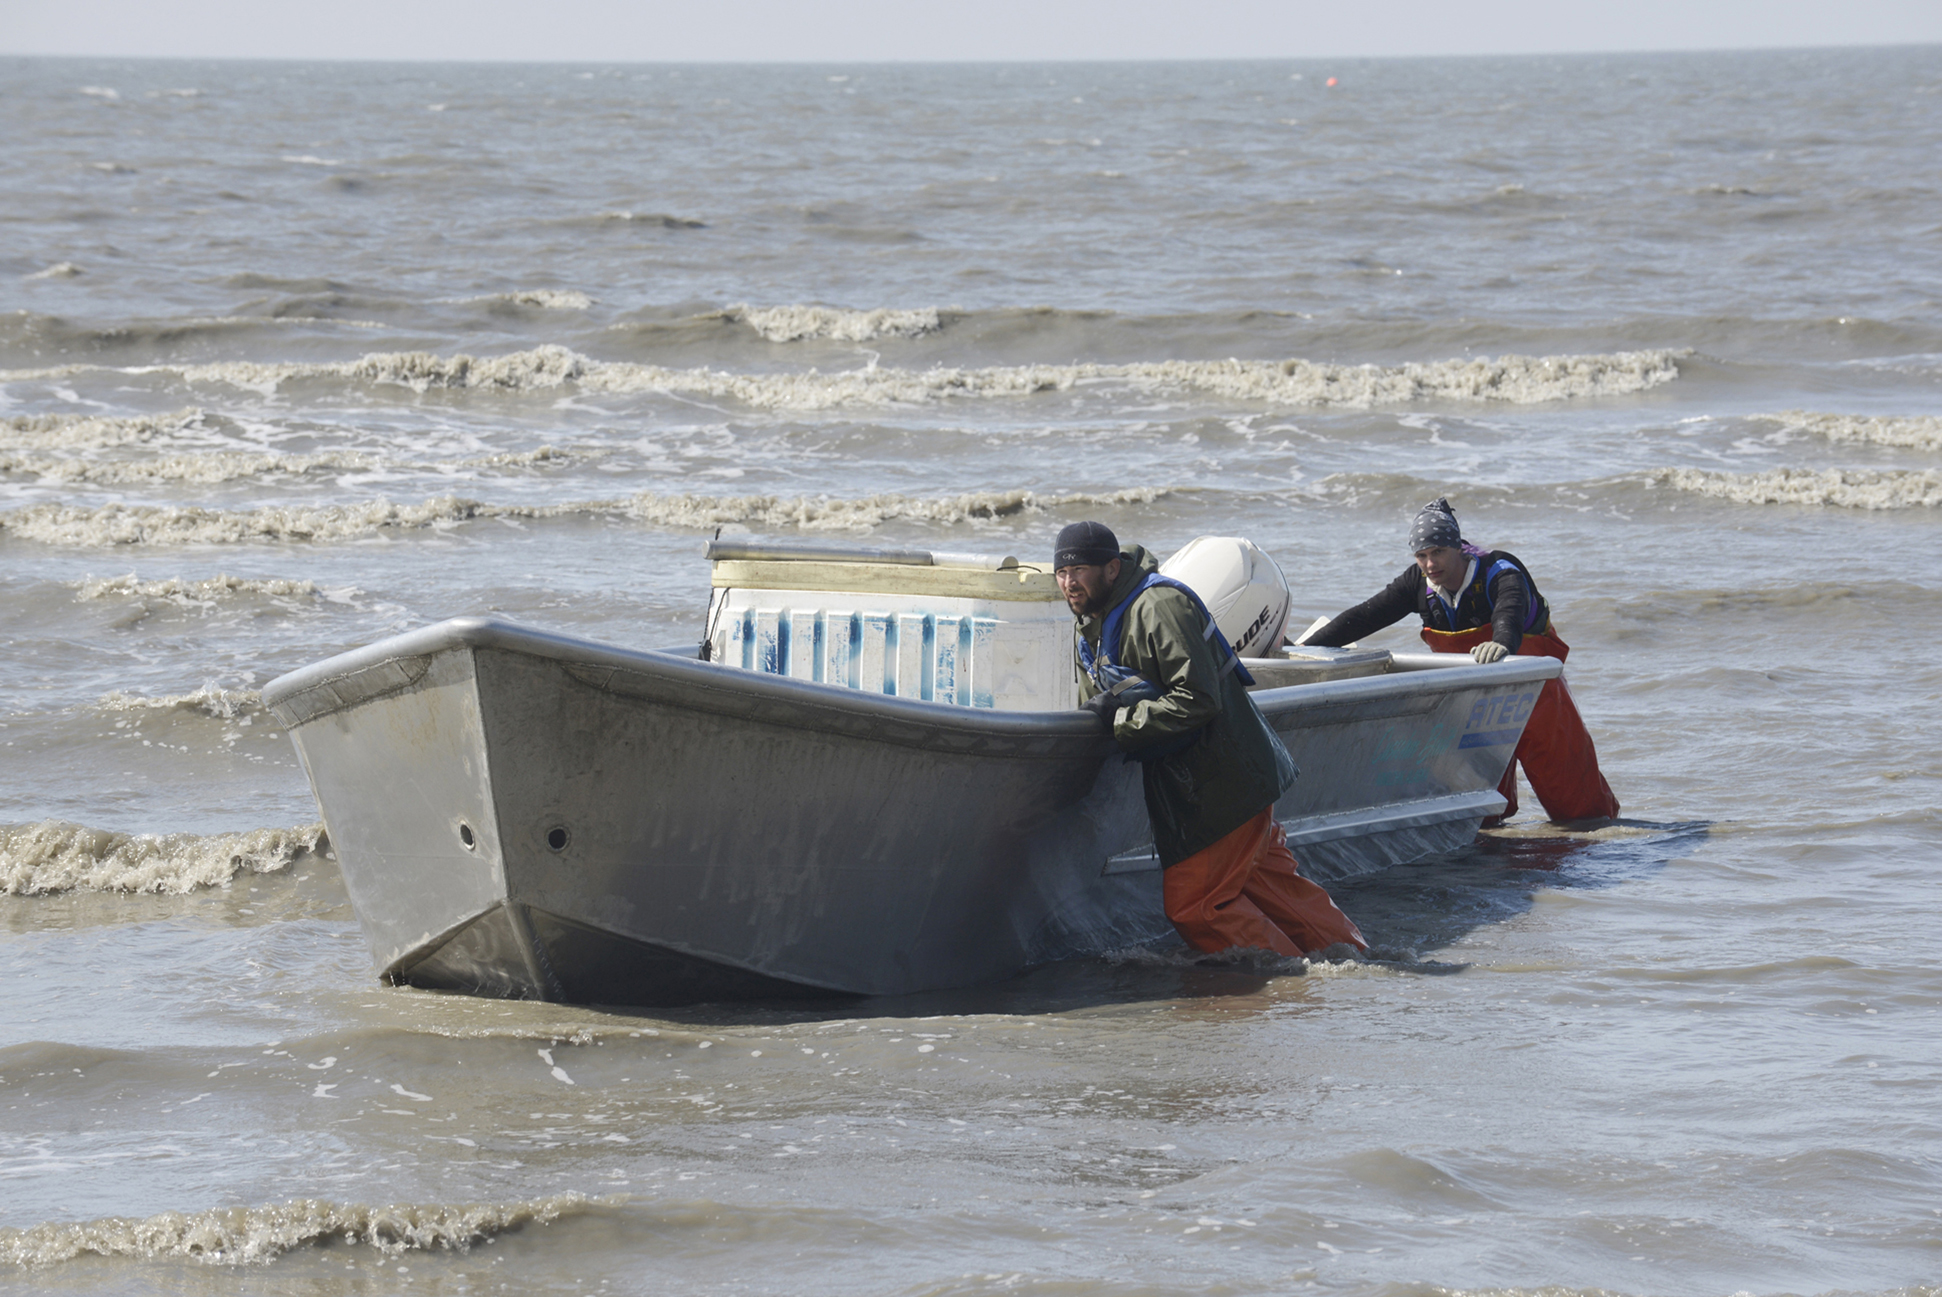 Setnetters in the Kasilof Section of the East Side Setnet Fishery push a boat into shore June 27, 2013. On Monday, Lt. Gov. Mead Treadwell rejected a proposed initiative that would have banned the use of setnets in Cook Inlet.